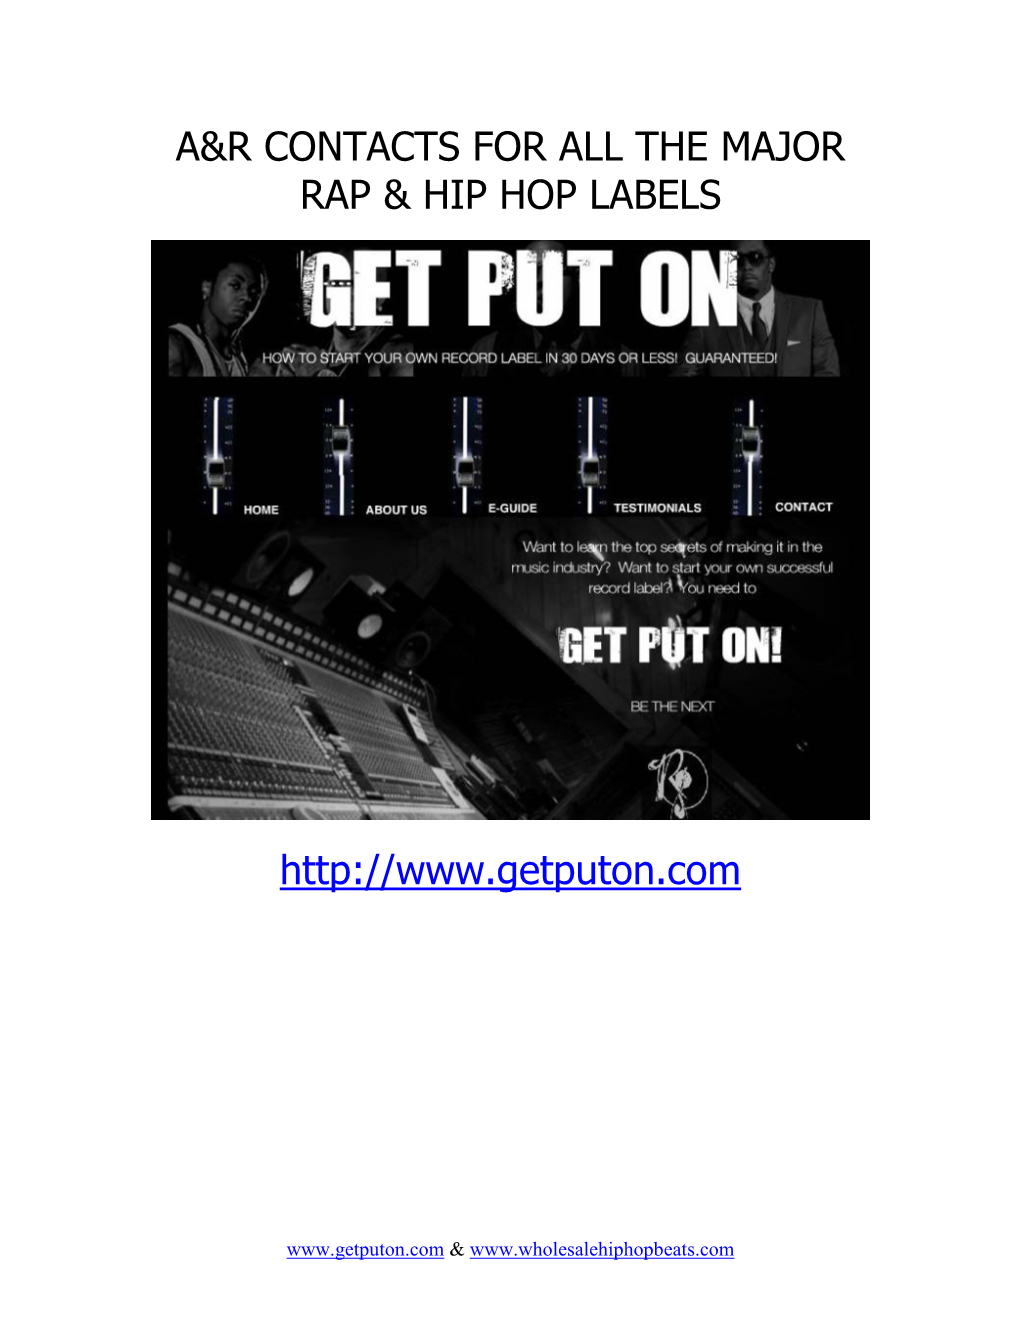 A&R Contacts for All Major Labels